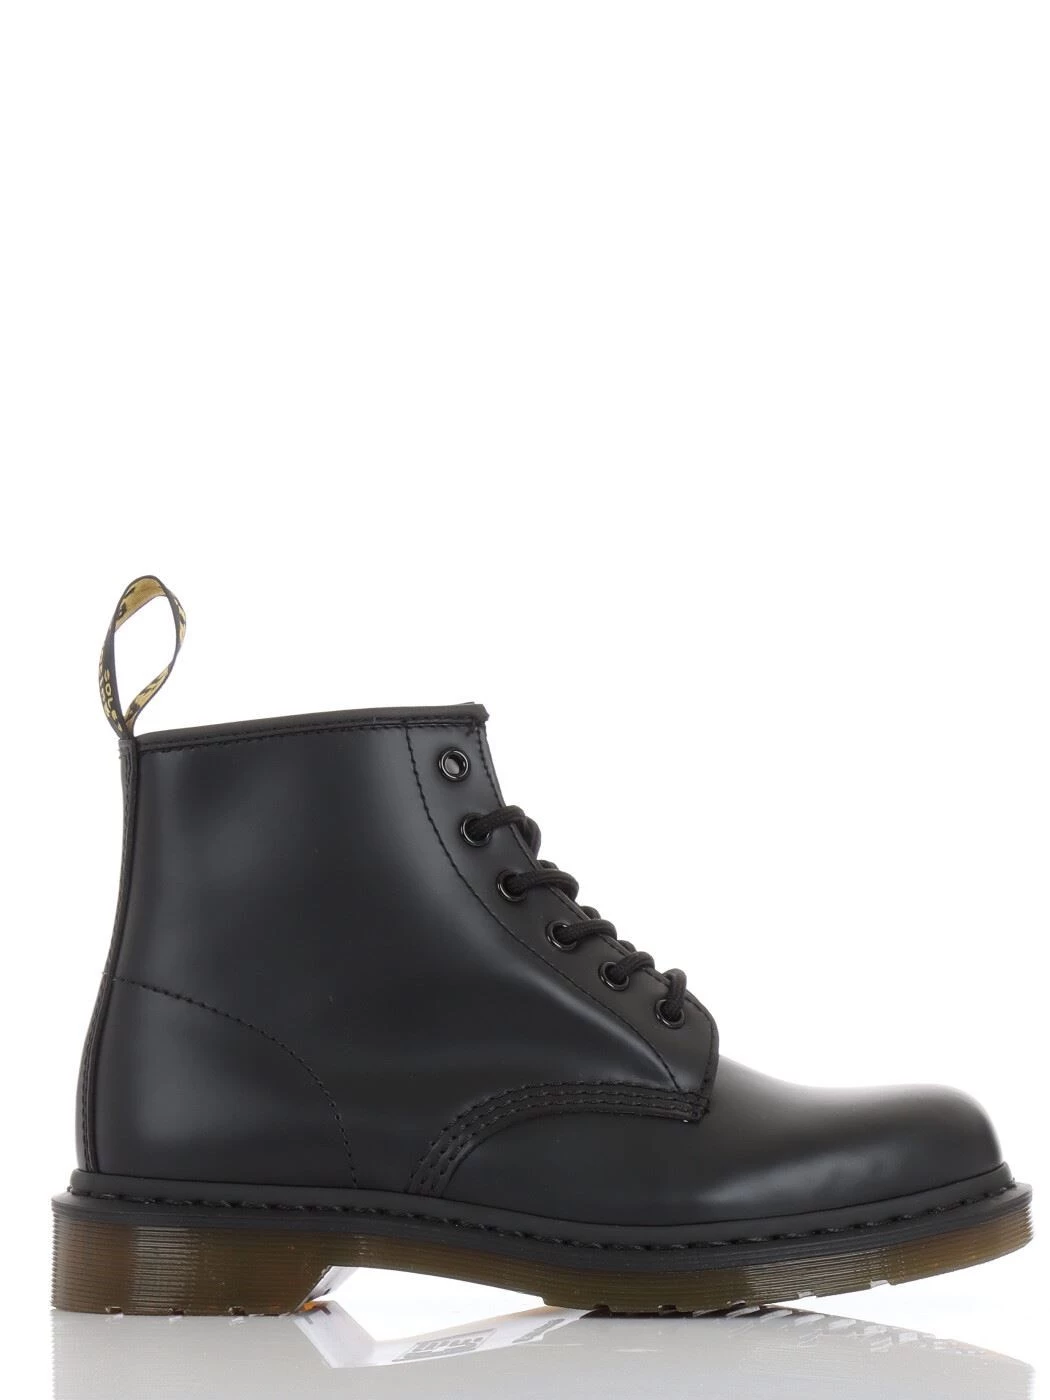 ANFIBI DR.MARTENS 101 SMOOTH